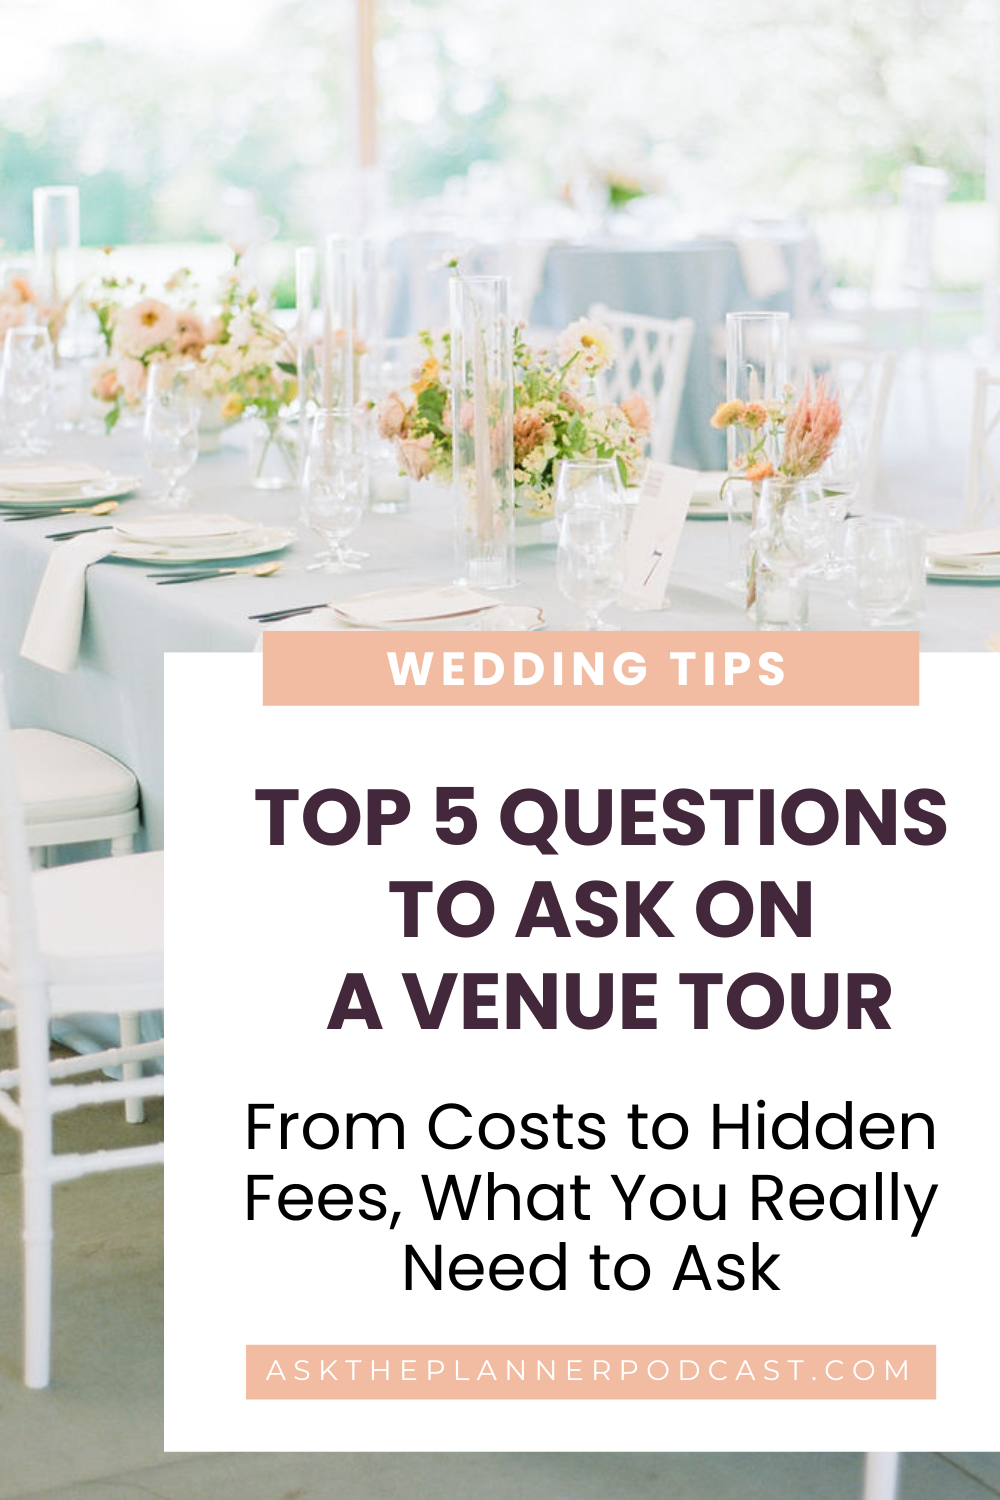 Top 5 Questions to Ask on a Venue Tour